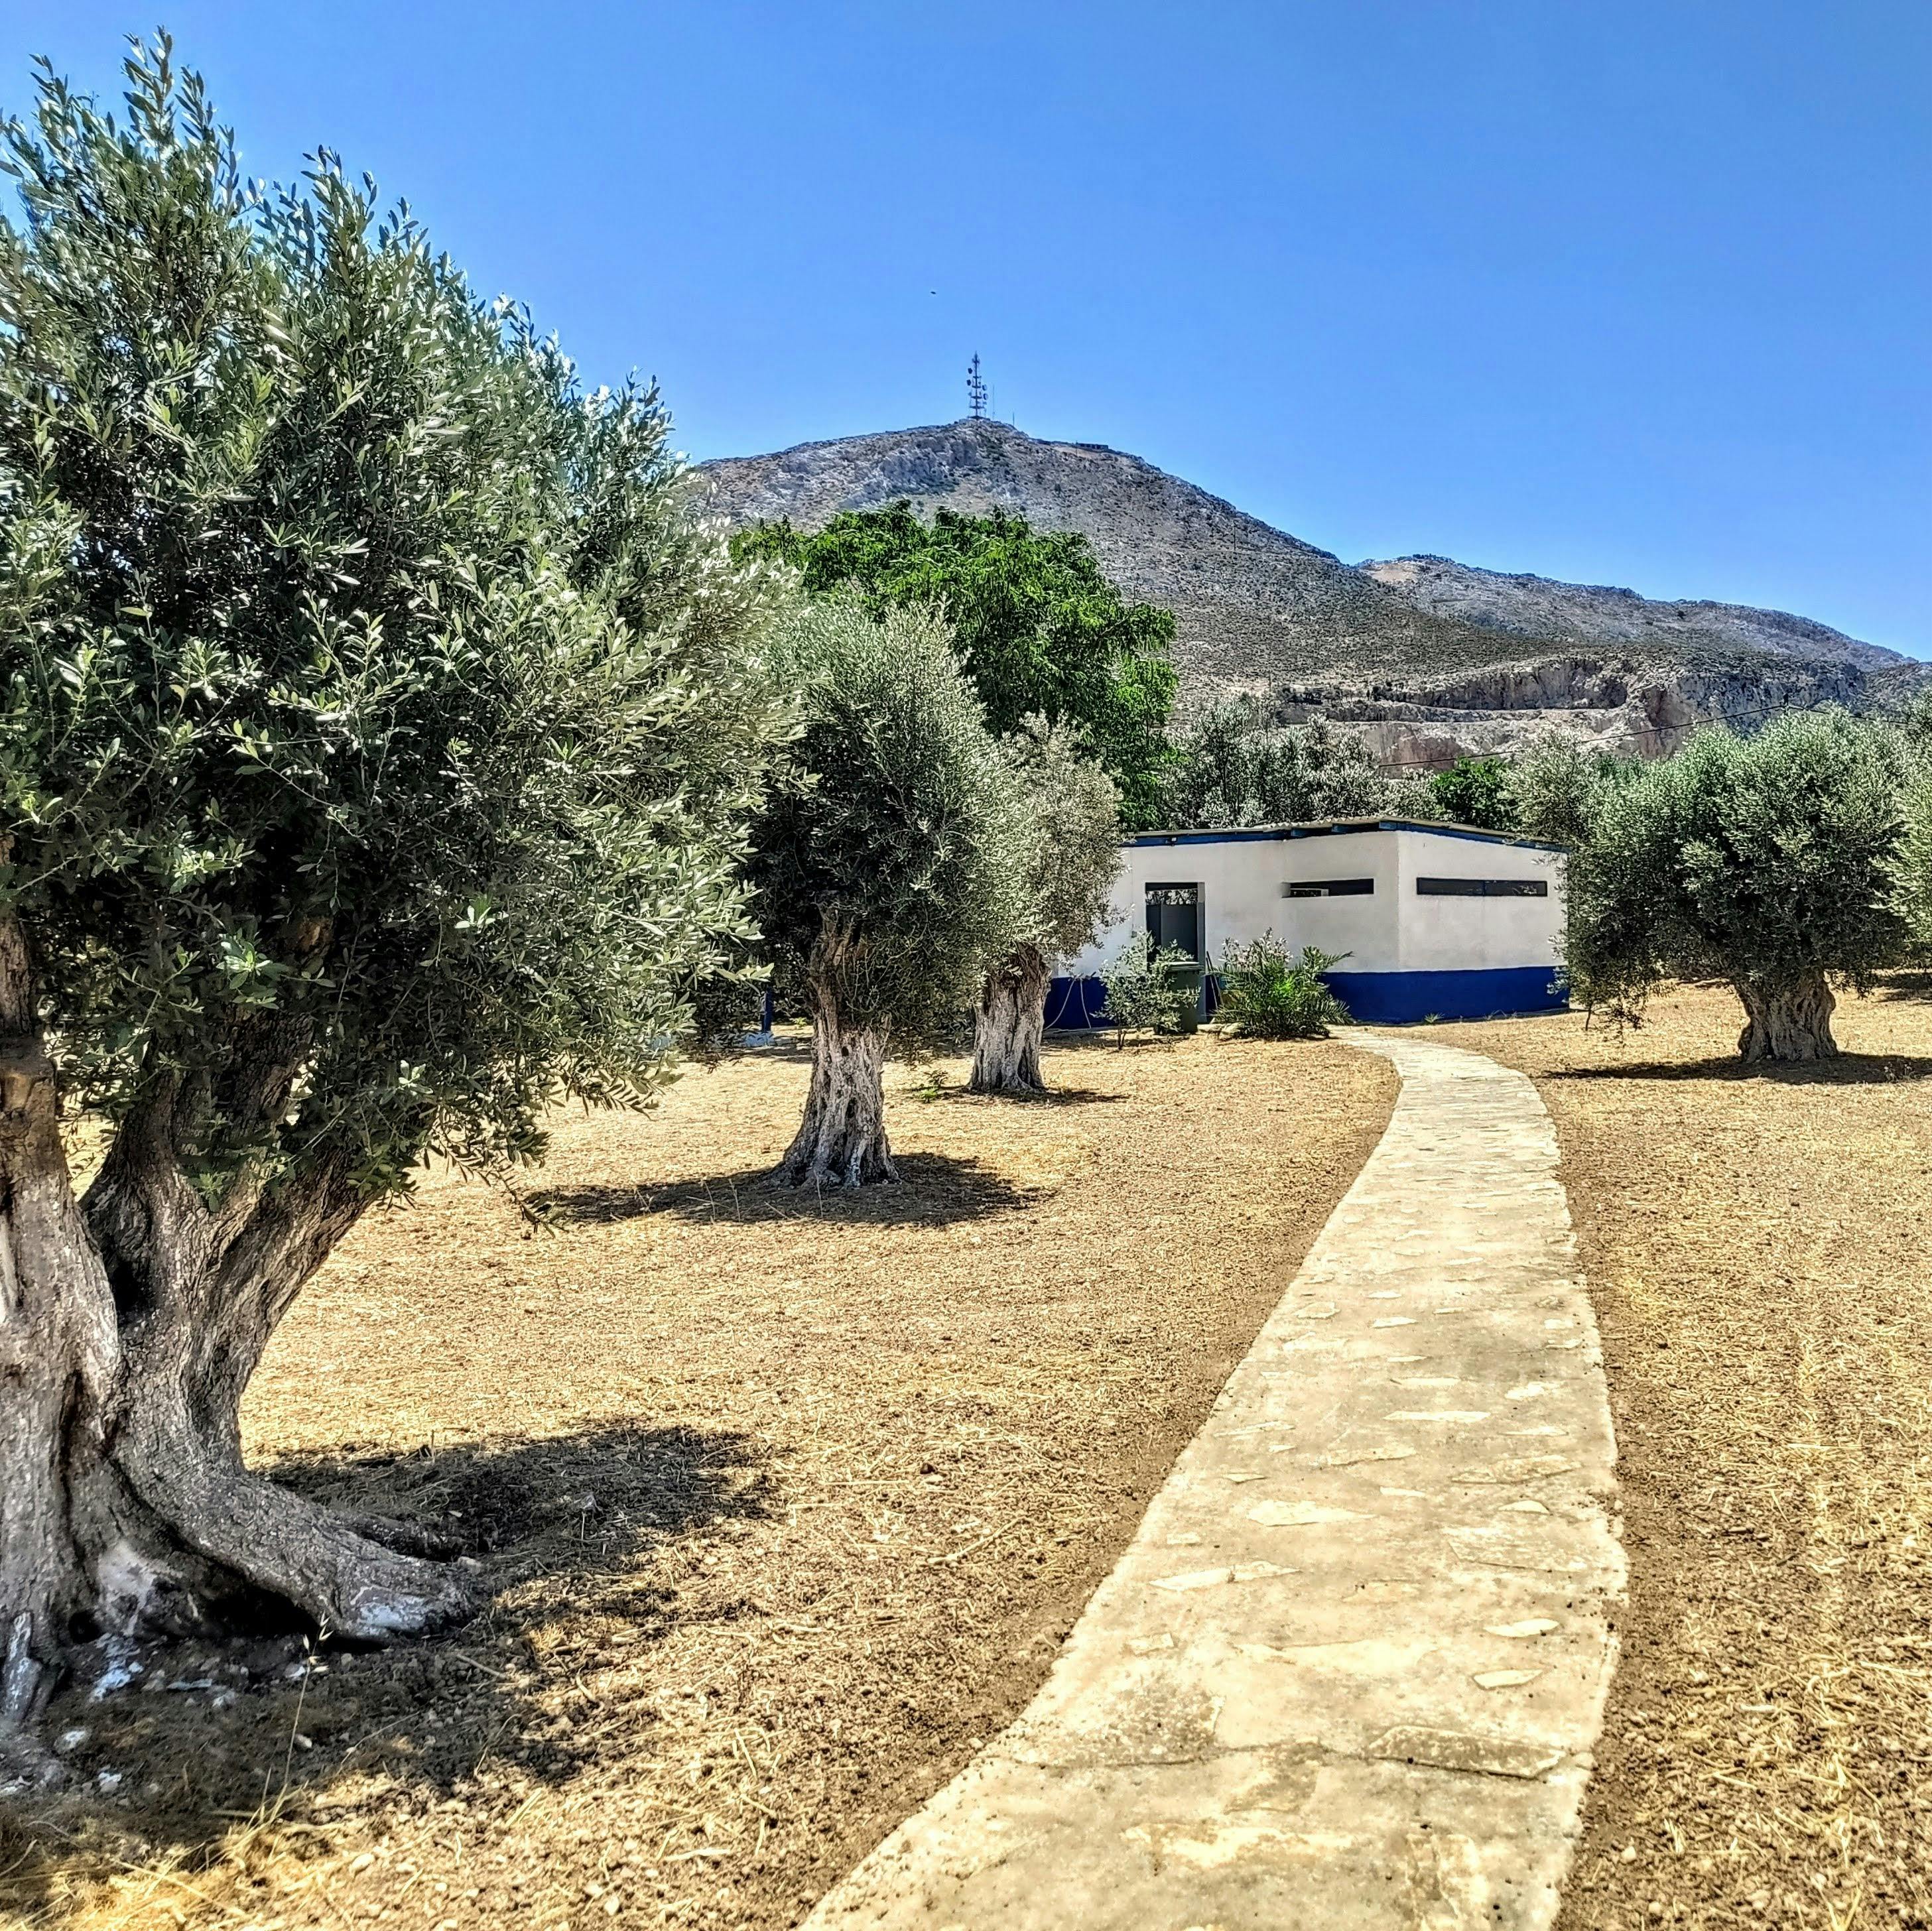 The main house of Leros Camping & Diving